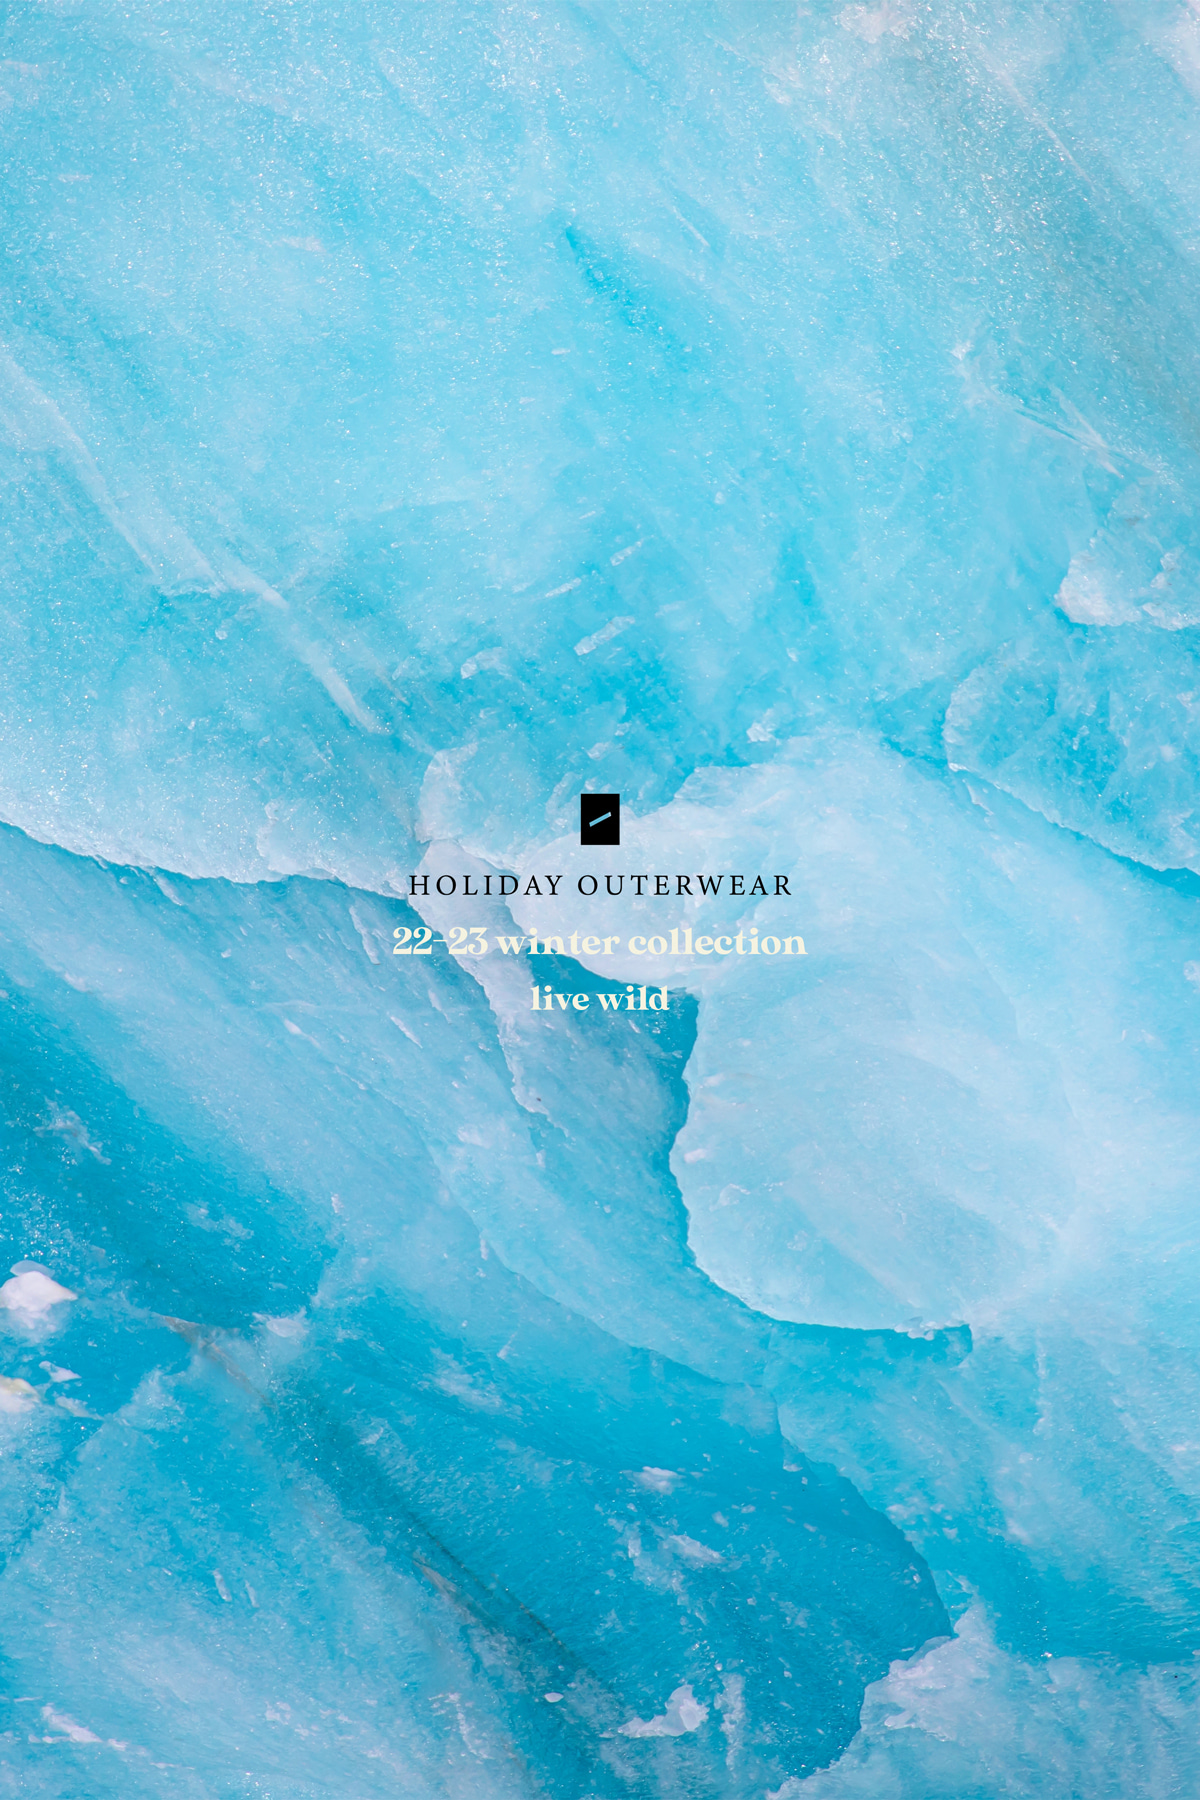 2022 WINTER COLLECTIONHOLIDAY OUTERWEAR